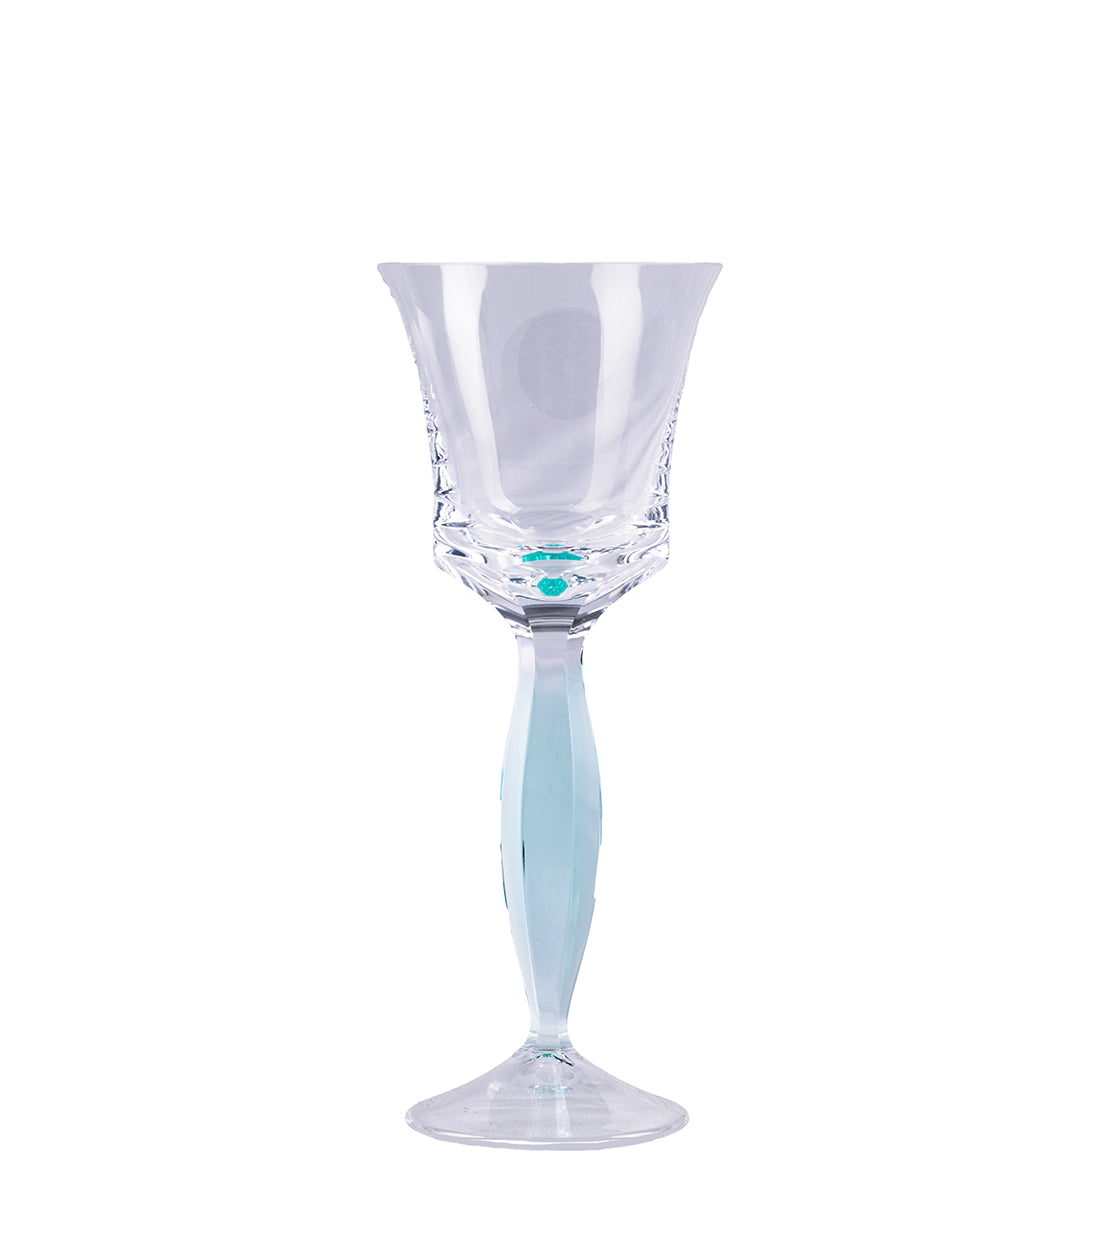 MOSER - Sparkly Turquoise Waves - Turquoise Coloured Standing Wine & Champagne Glass.